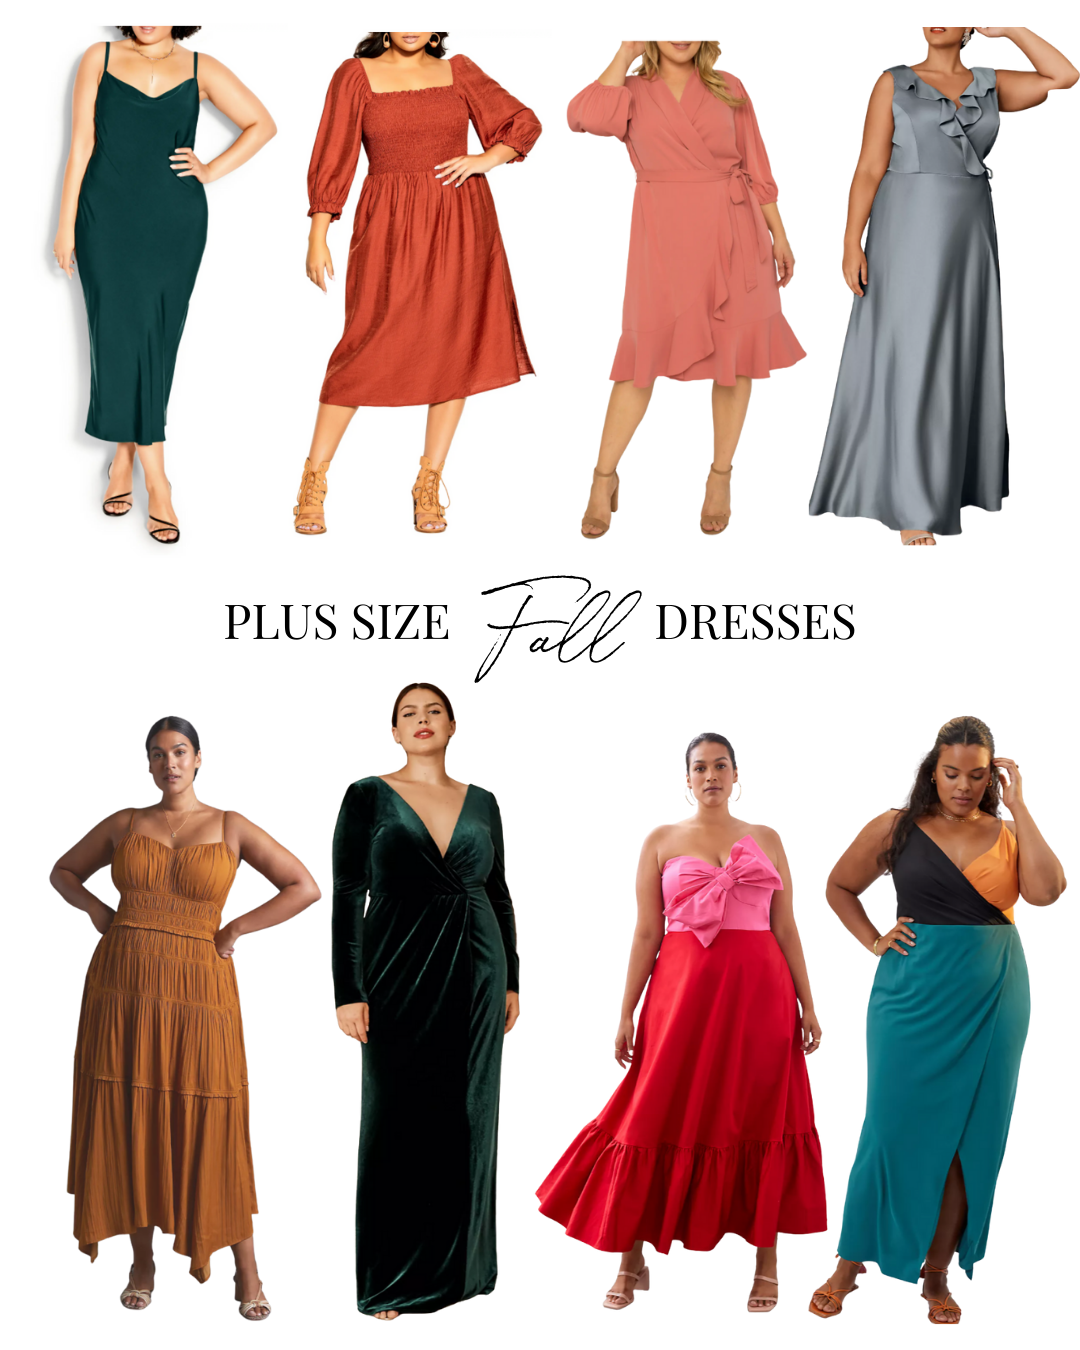 8 Plus Size Formal Dresses Perfect For Fall - www.carlakiley.com